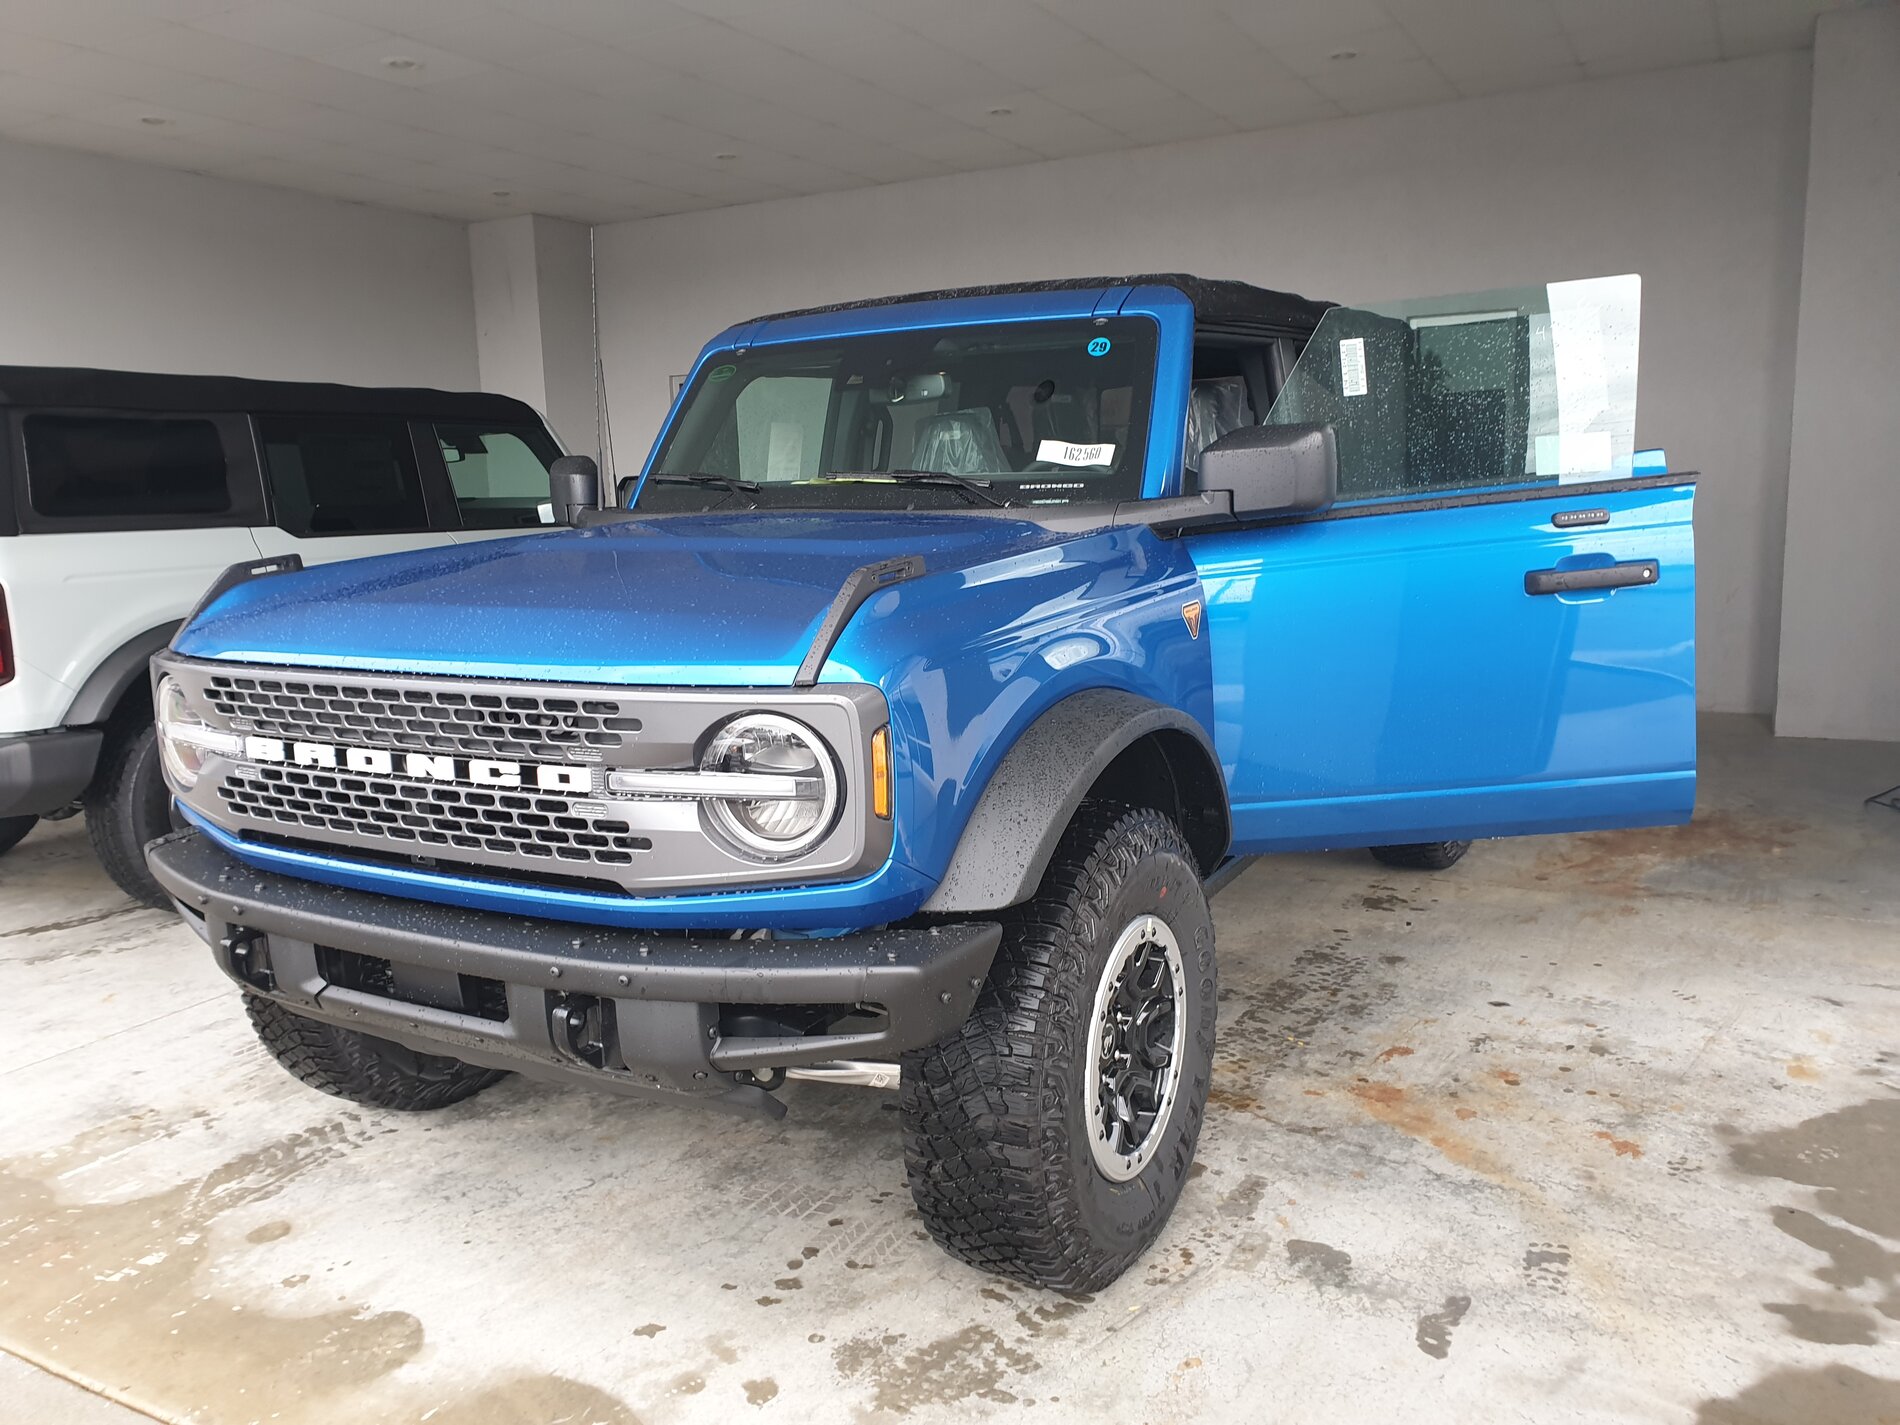 Ford Bronco First 24 hrs in my Badlands Sasquatch 4dr 2.7L Velocity Blue Soft Top (w/ Rear Cargo Enclosure review) 20210719_175639